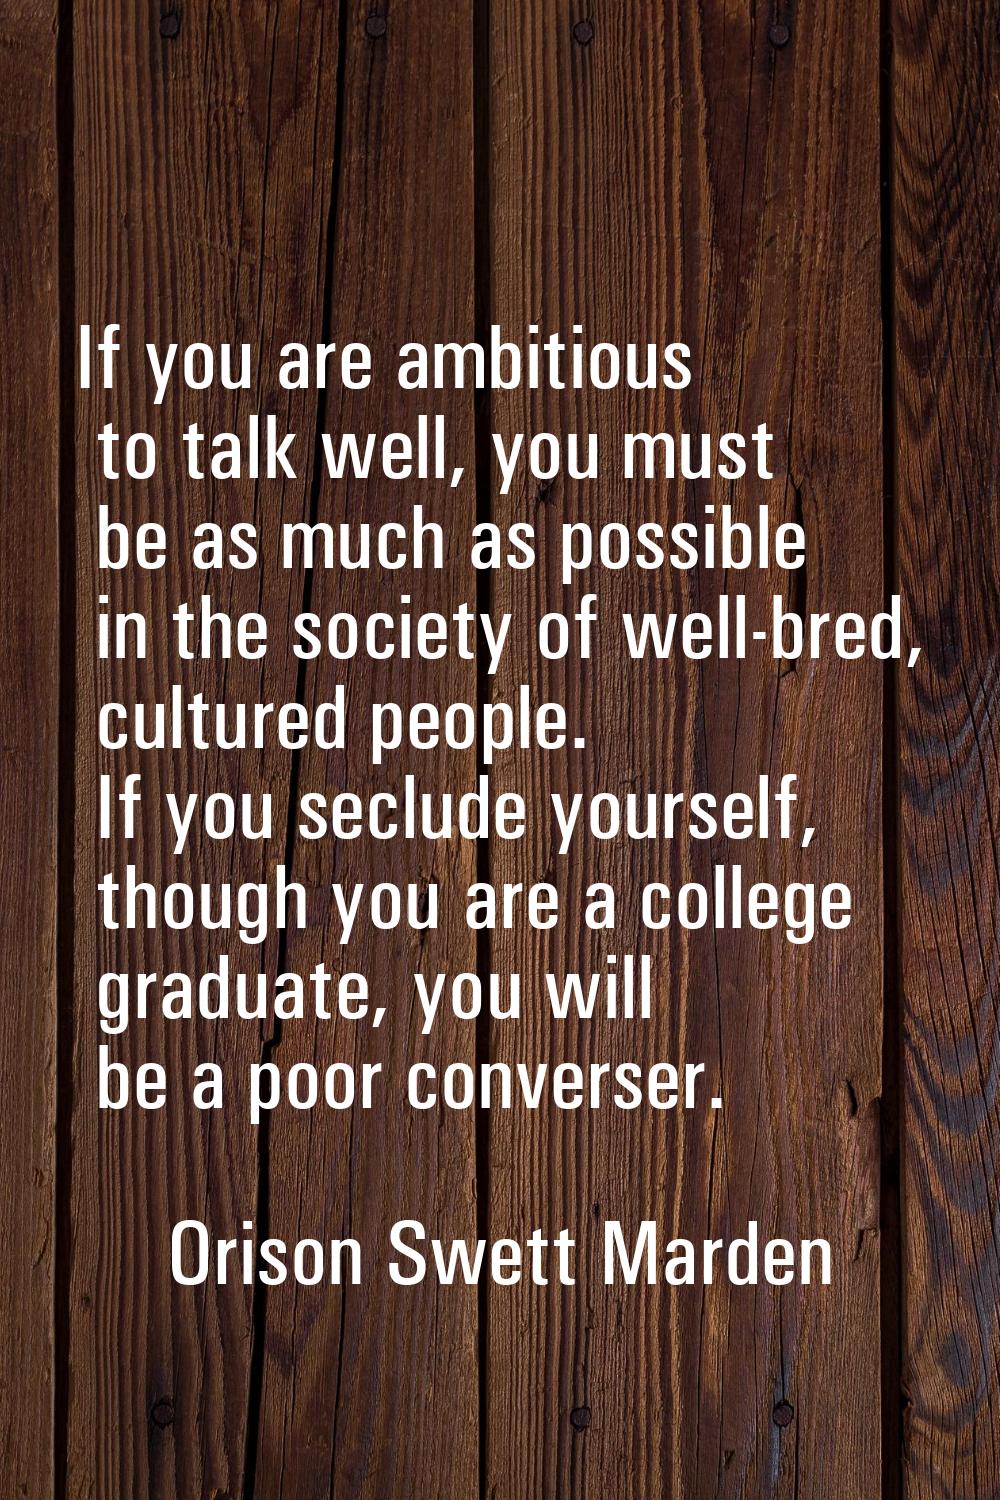 If you are ambitious to talk well, you must be as much as possible in the society of well-bred, cul